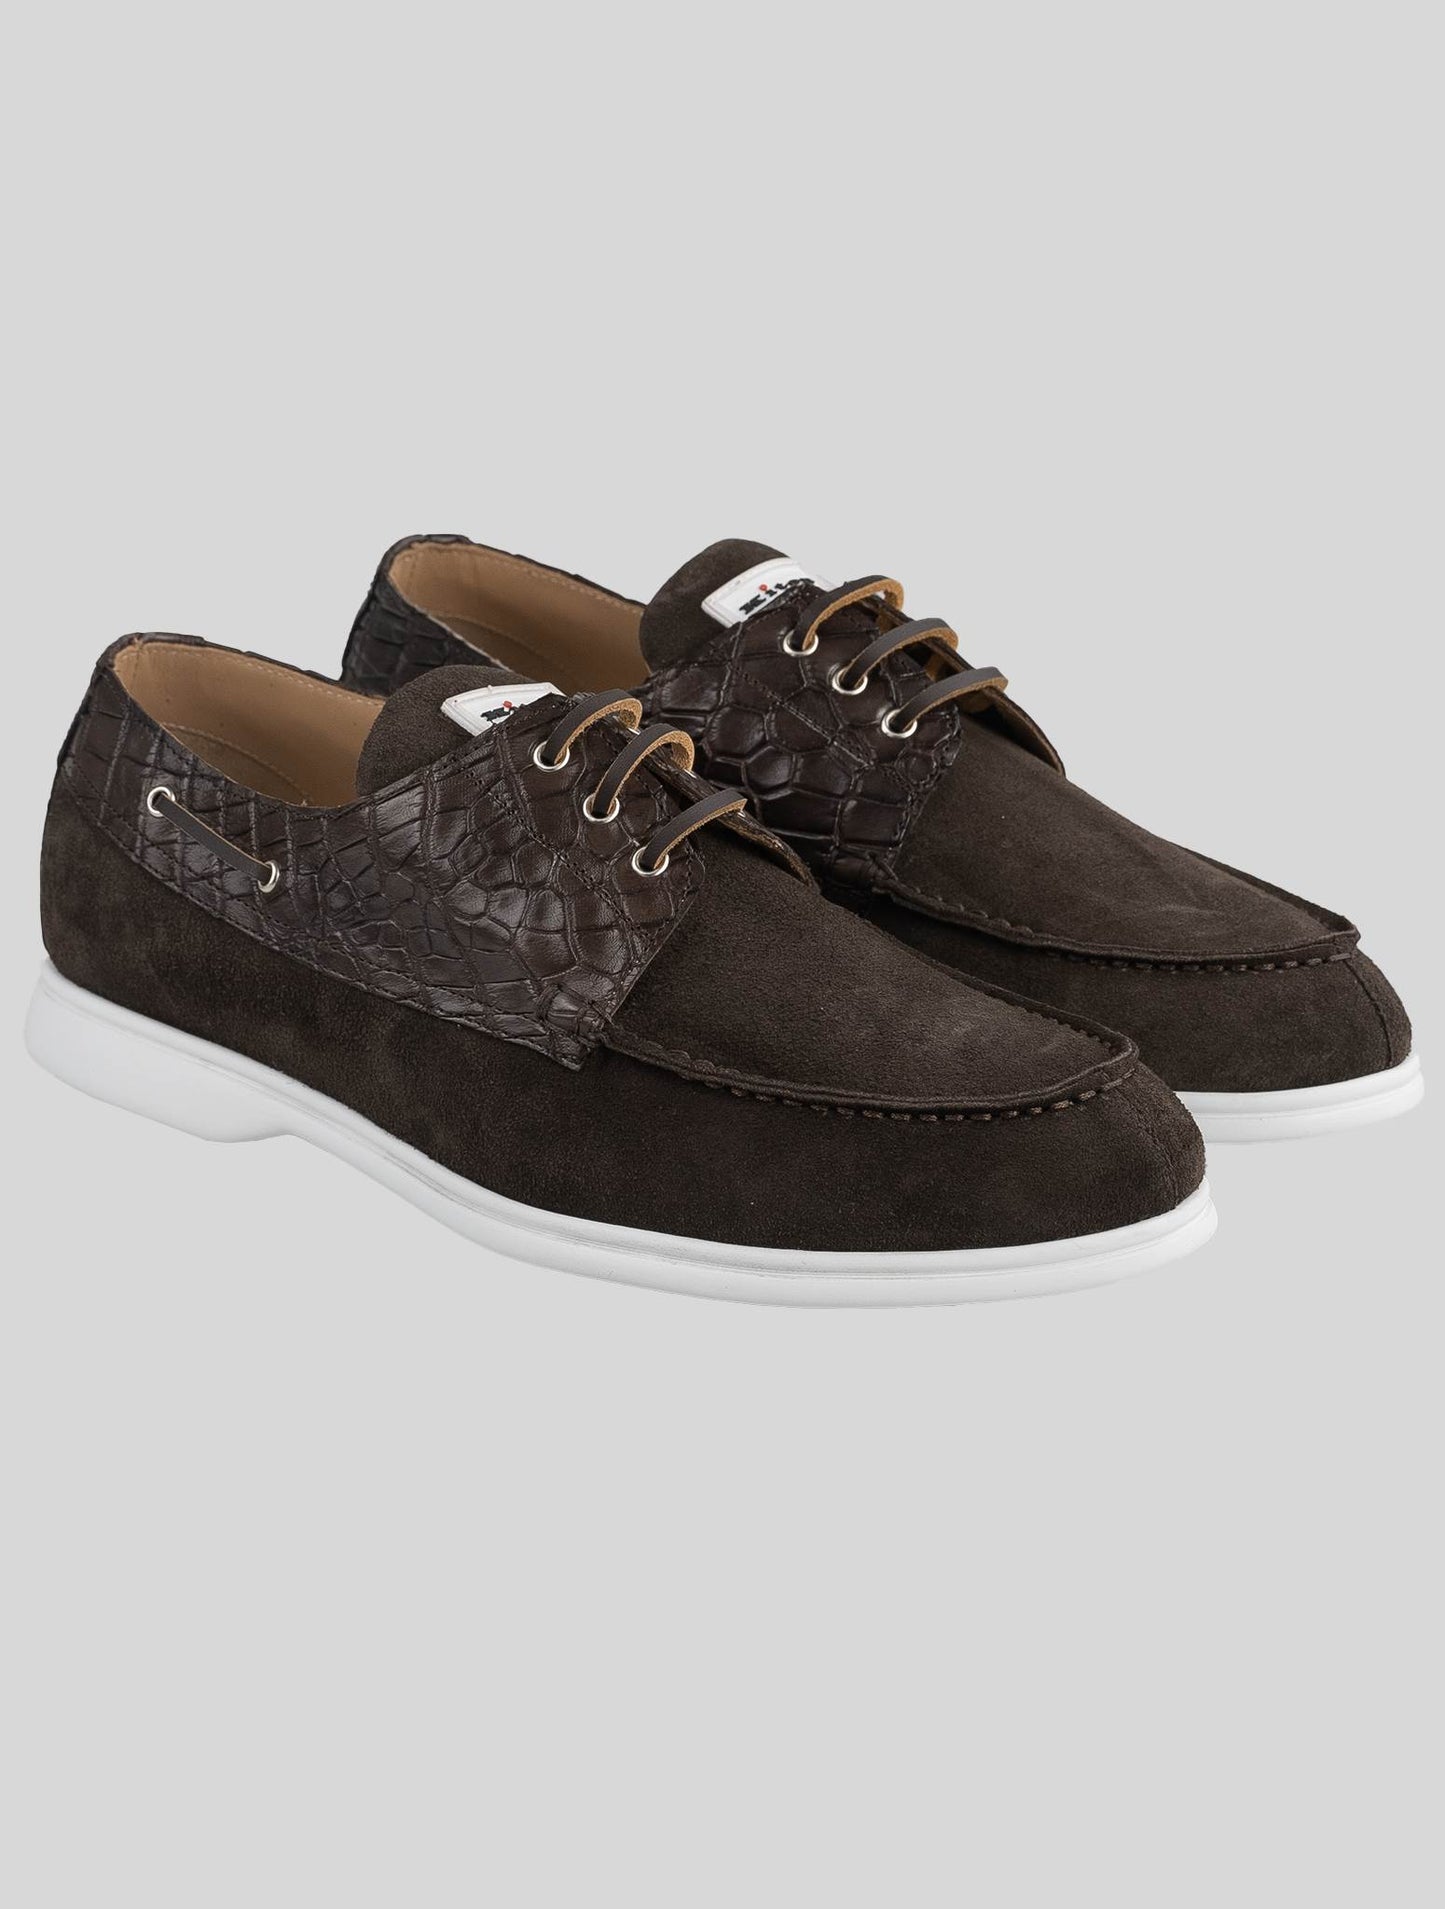 Kiton Brown Leather Suede Leather Crocodile Sneakers Shoes